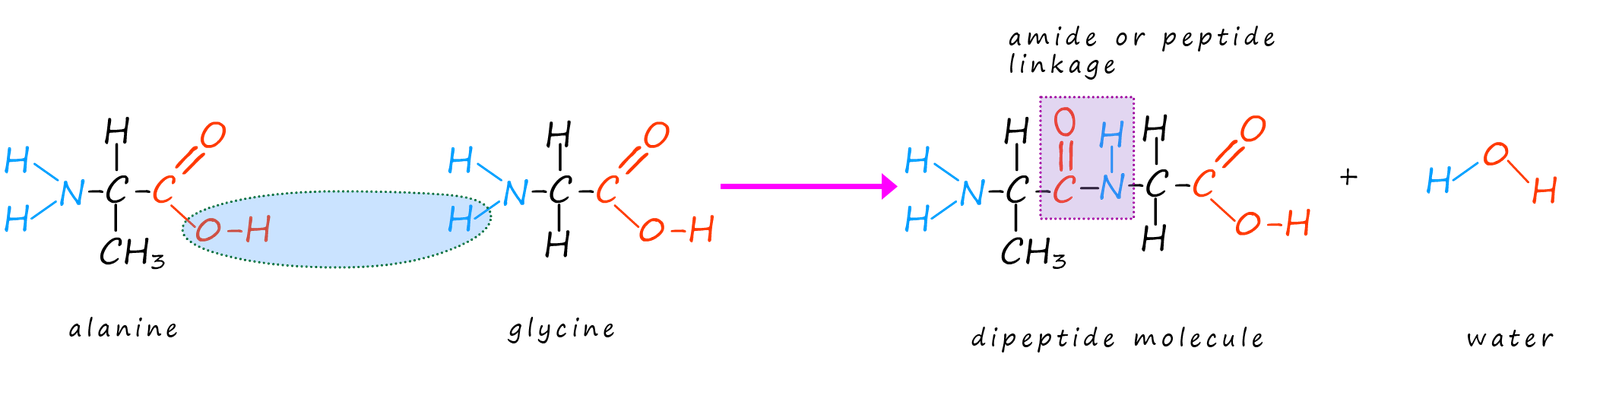 amino acid molecules can react to form a dipeptide or a polypeptide which contains amide bonds